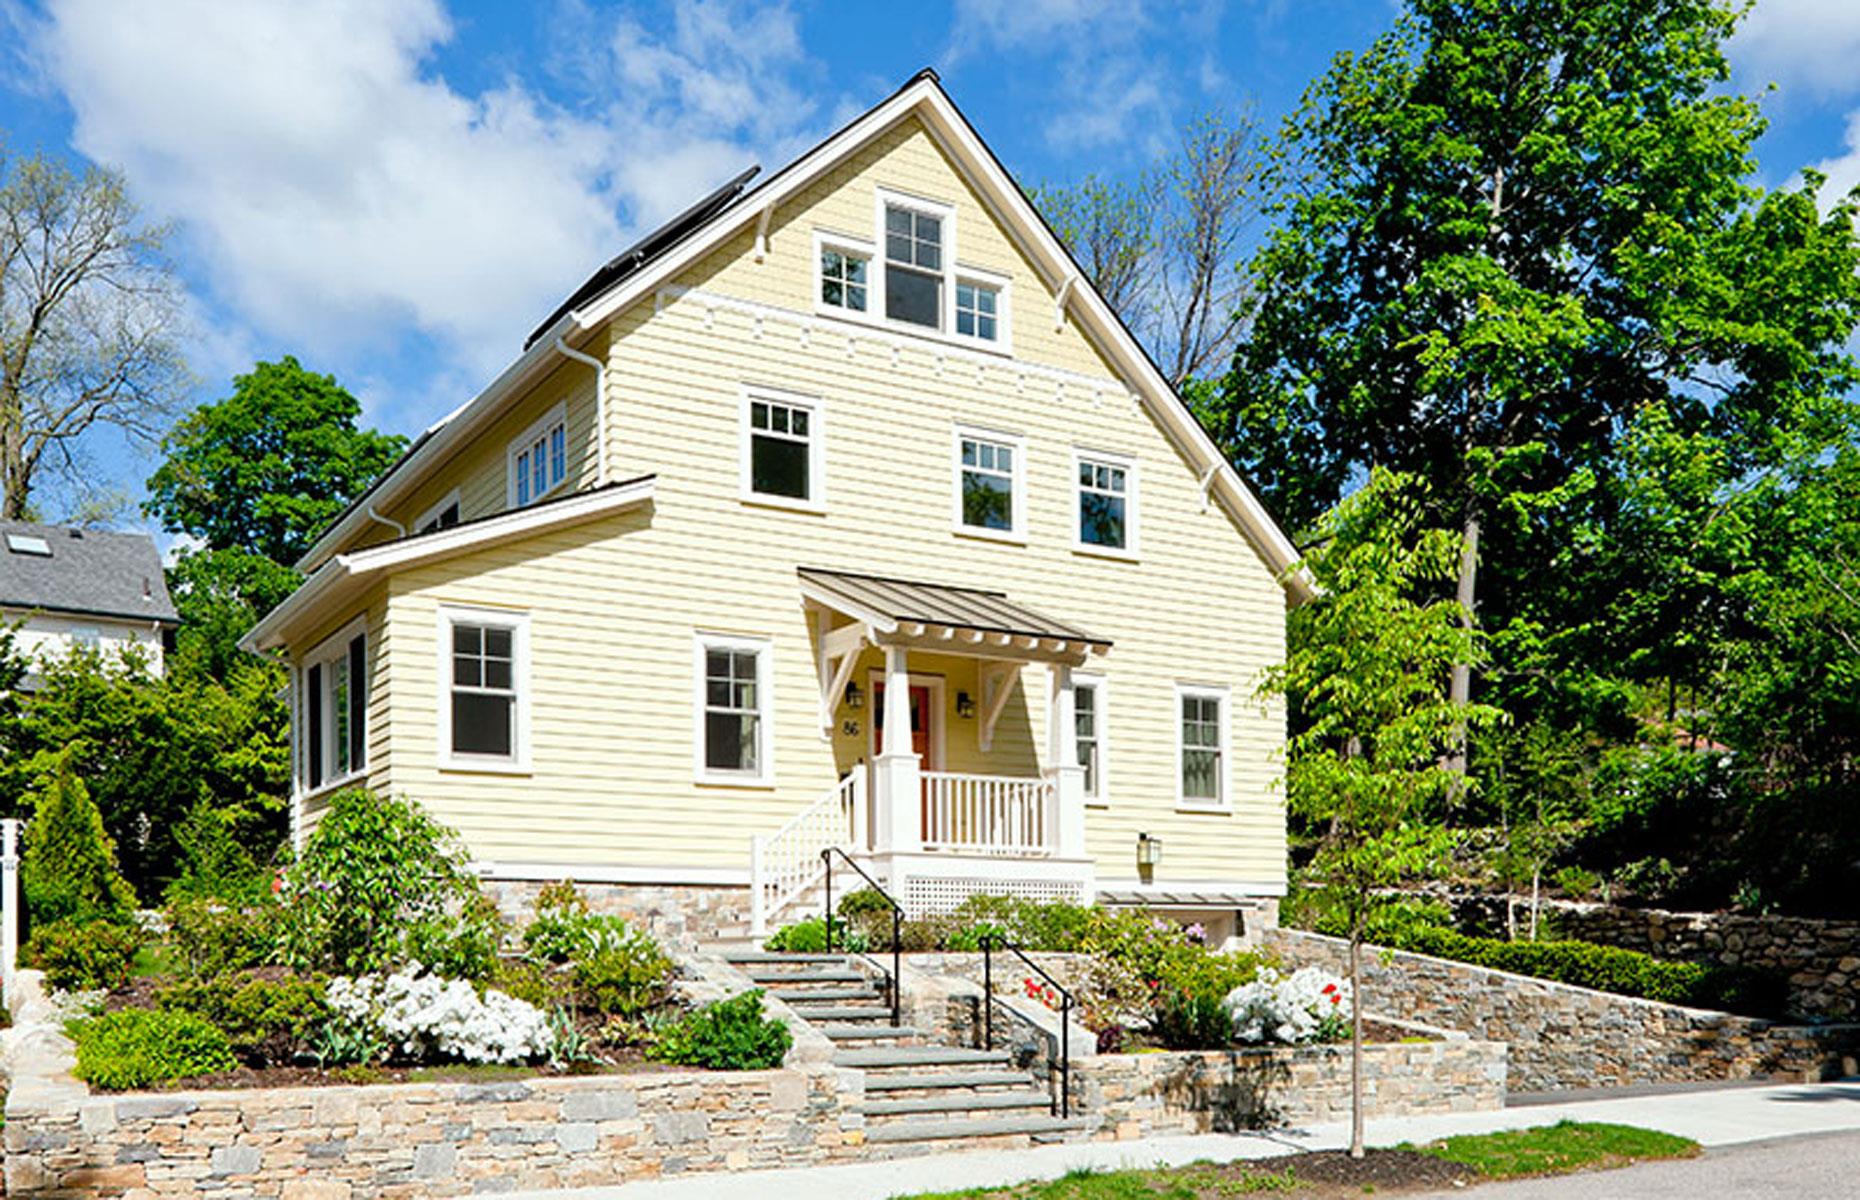 <p>This custom clapboard home in Belmont, Massachusetts is notable for being one of the greenest residential properties in the state. The handiwork of <a href="http://plattbuilders.com/">Platt Builders</a>, the house has everything from low-E windows and high-performance insulation, to solar panels on the roof.</p>